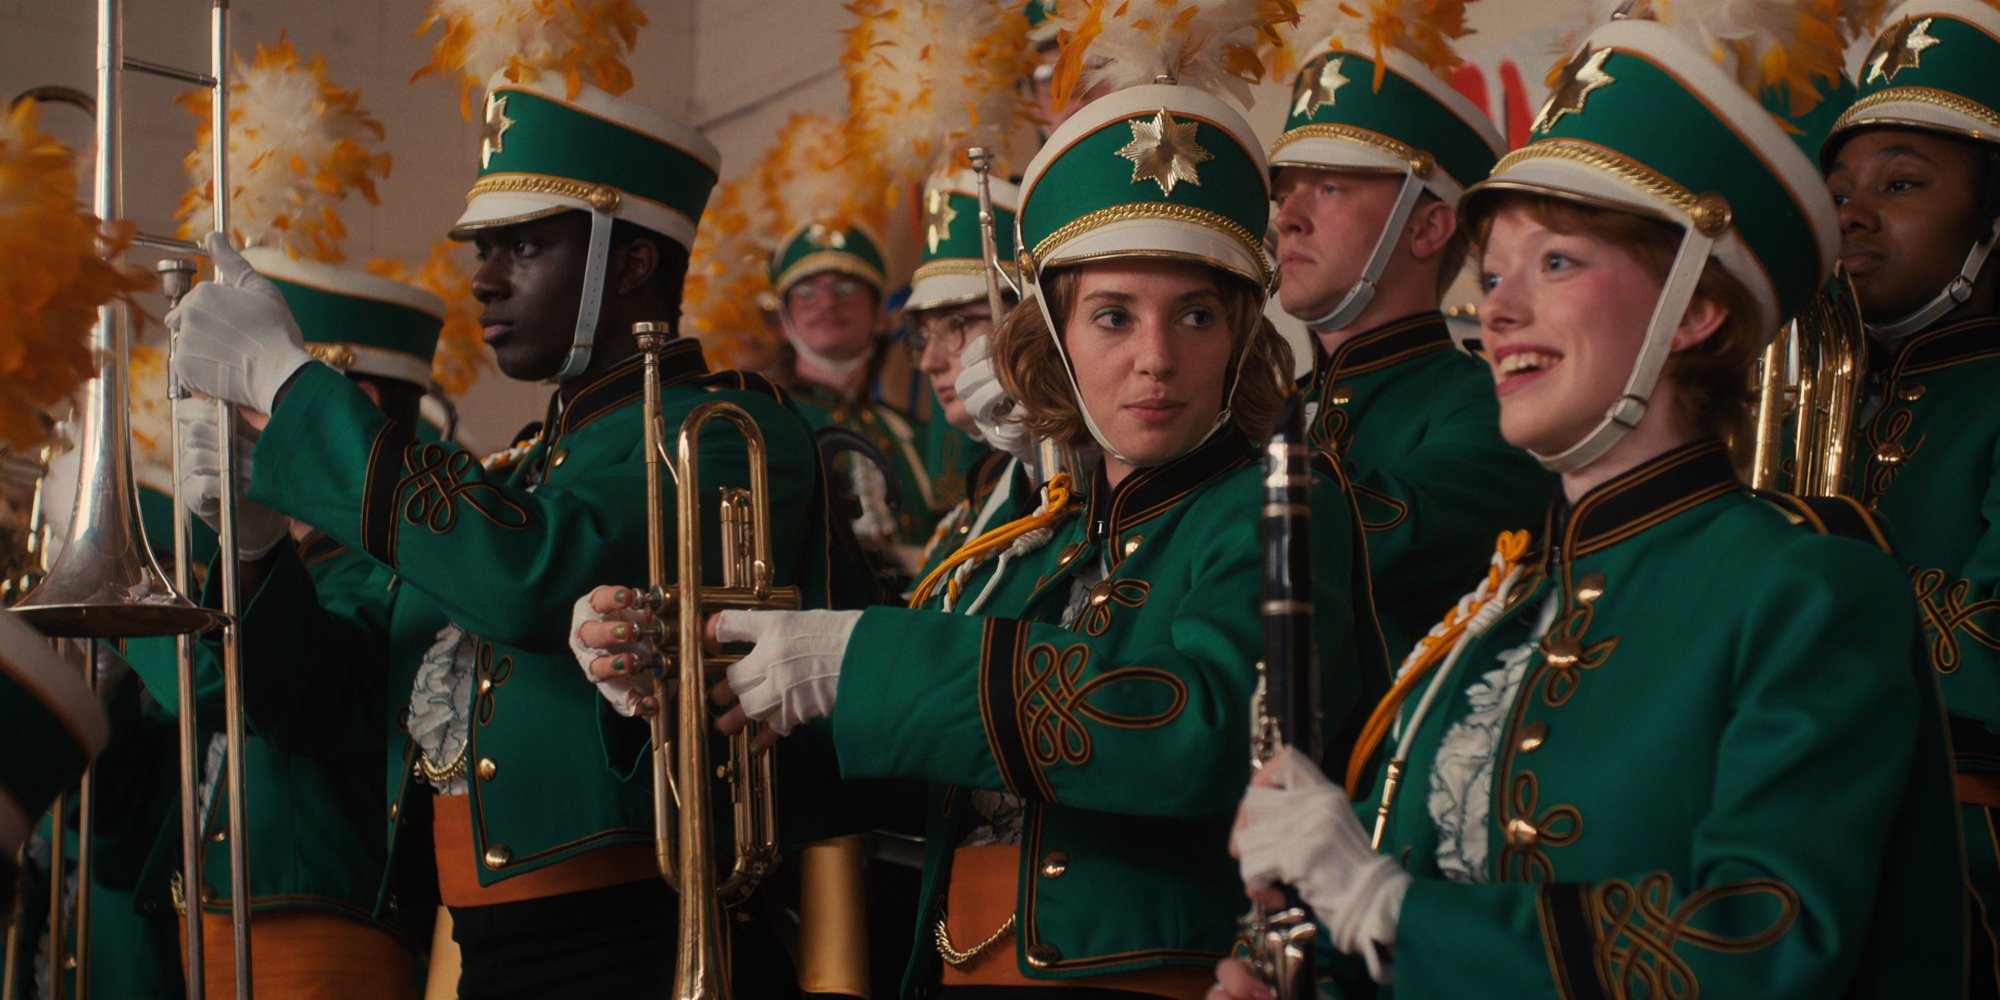 A high school band dressed in green and gold in a high school gym.